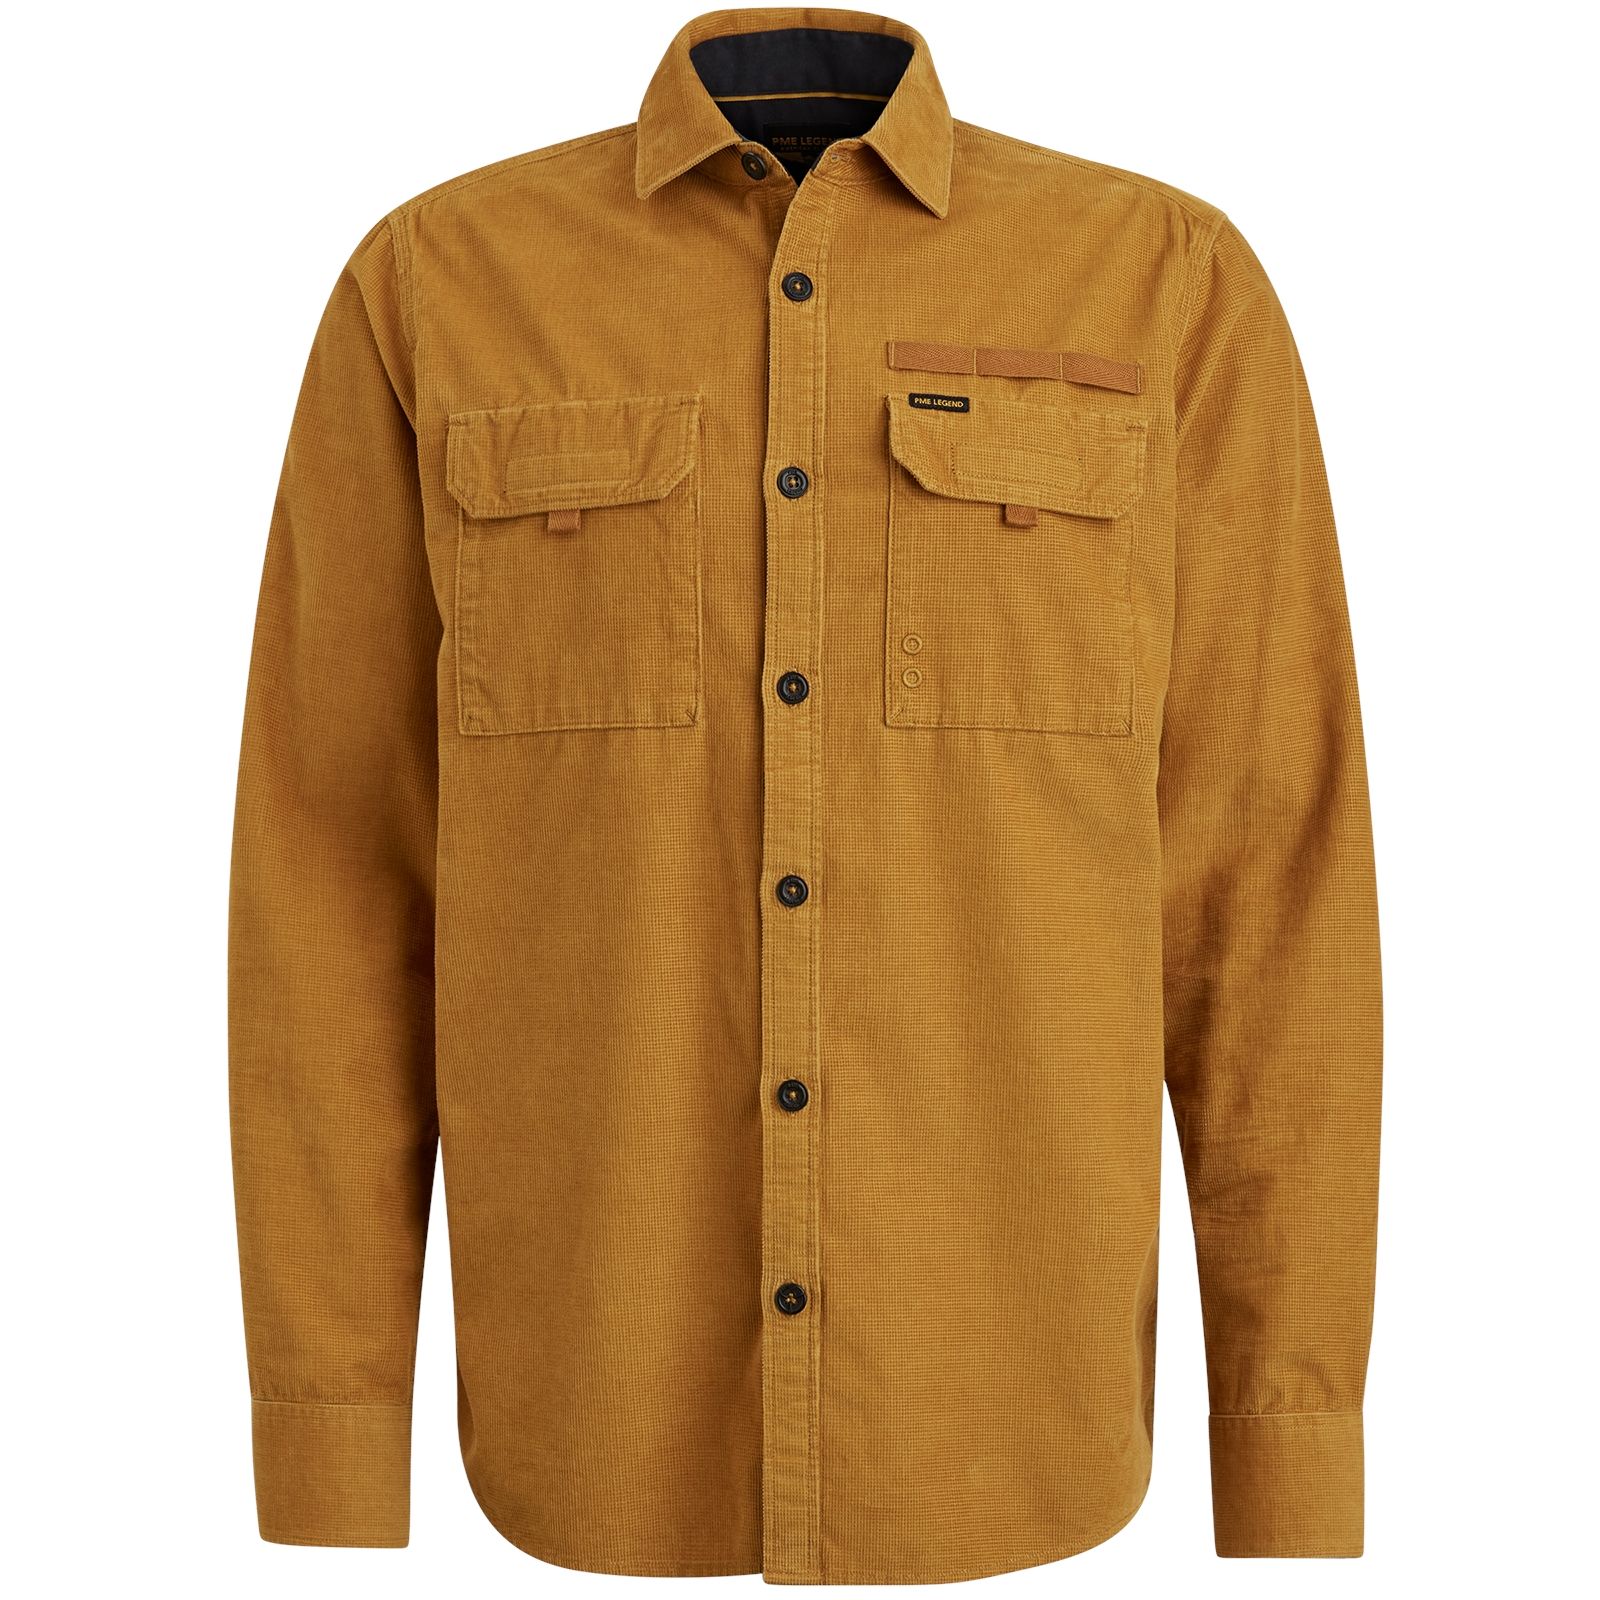 Pme Legend Long Sleeve Shirt Fine Waffle Cord Cathay Spice 00105934-8196